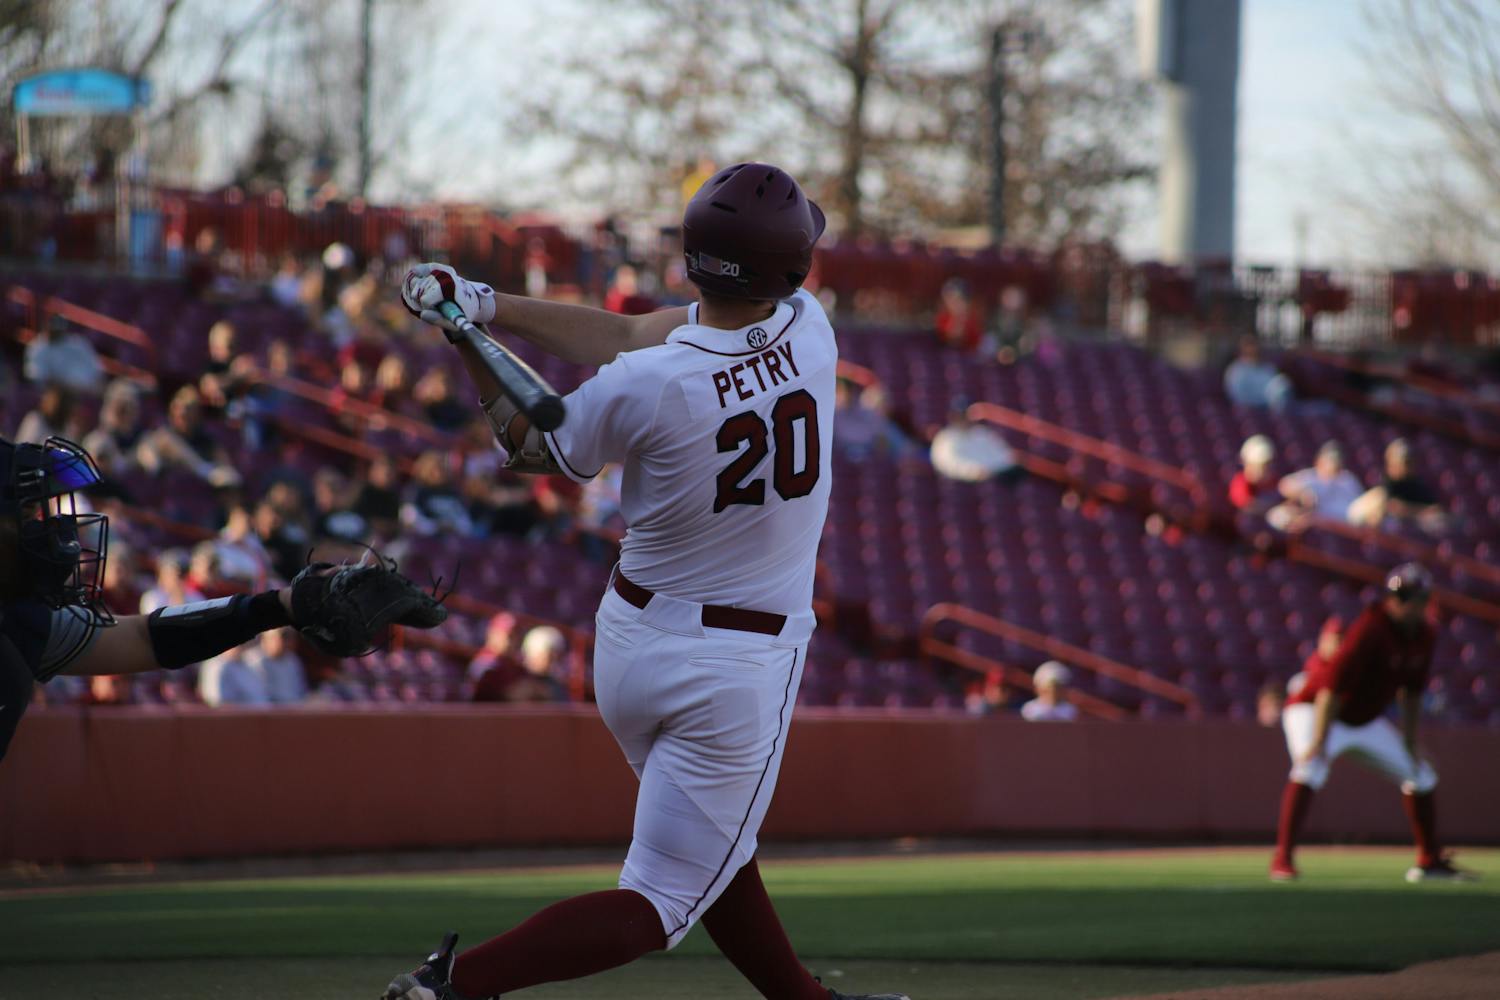 FILE—Freshman outfielder Ethan Petry up to bat for the South Carolina Gamecocks against Queens on Feb. 22. South Carolina secured its first shutout of the 鶹С򽴫ý with a 12-0 win, making this its fifth game in a row with double-digits scoring.